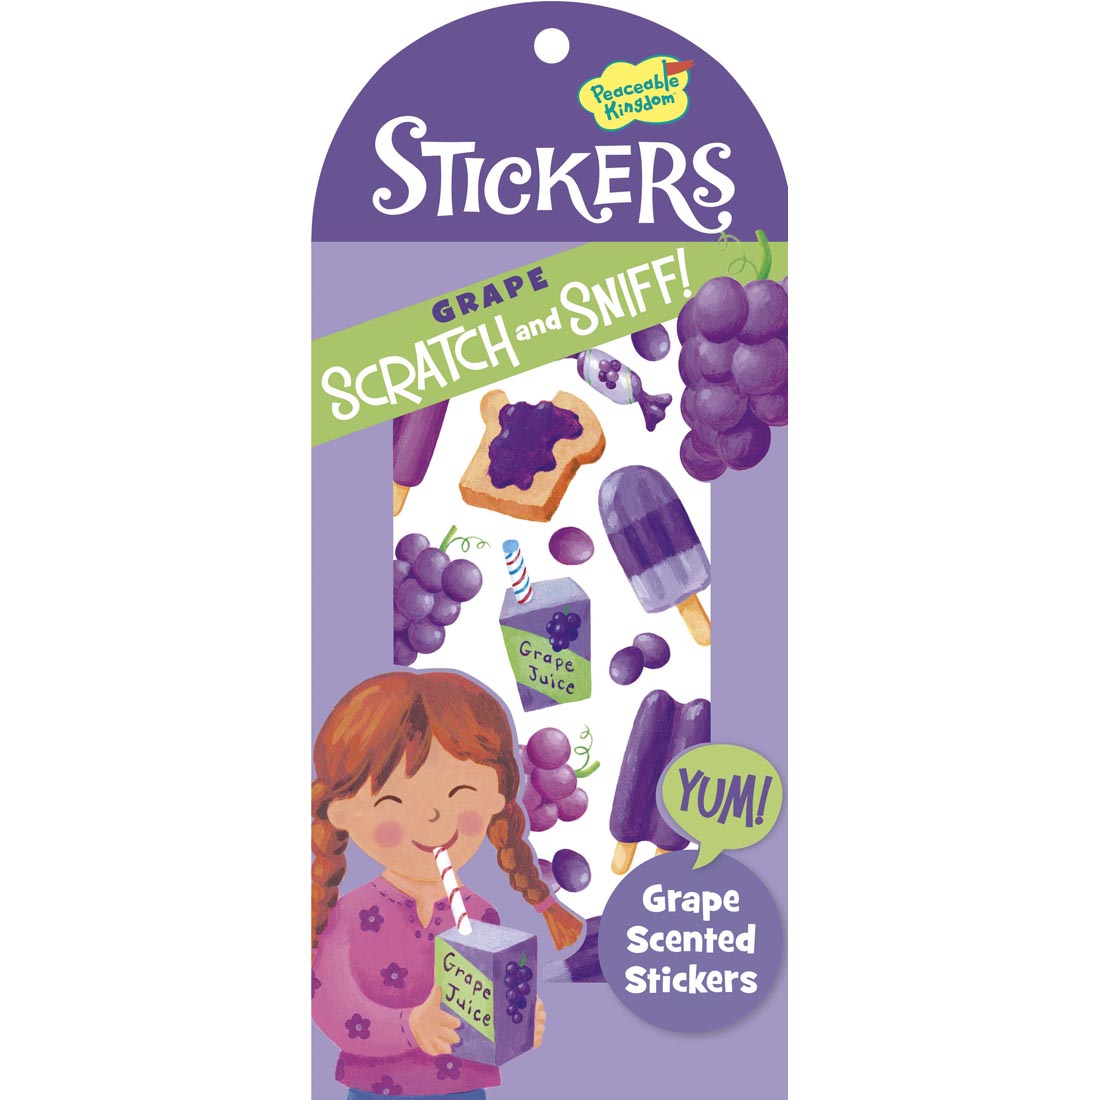 Grape Scratch and Sniff Stickers by Peaceable Kingdom